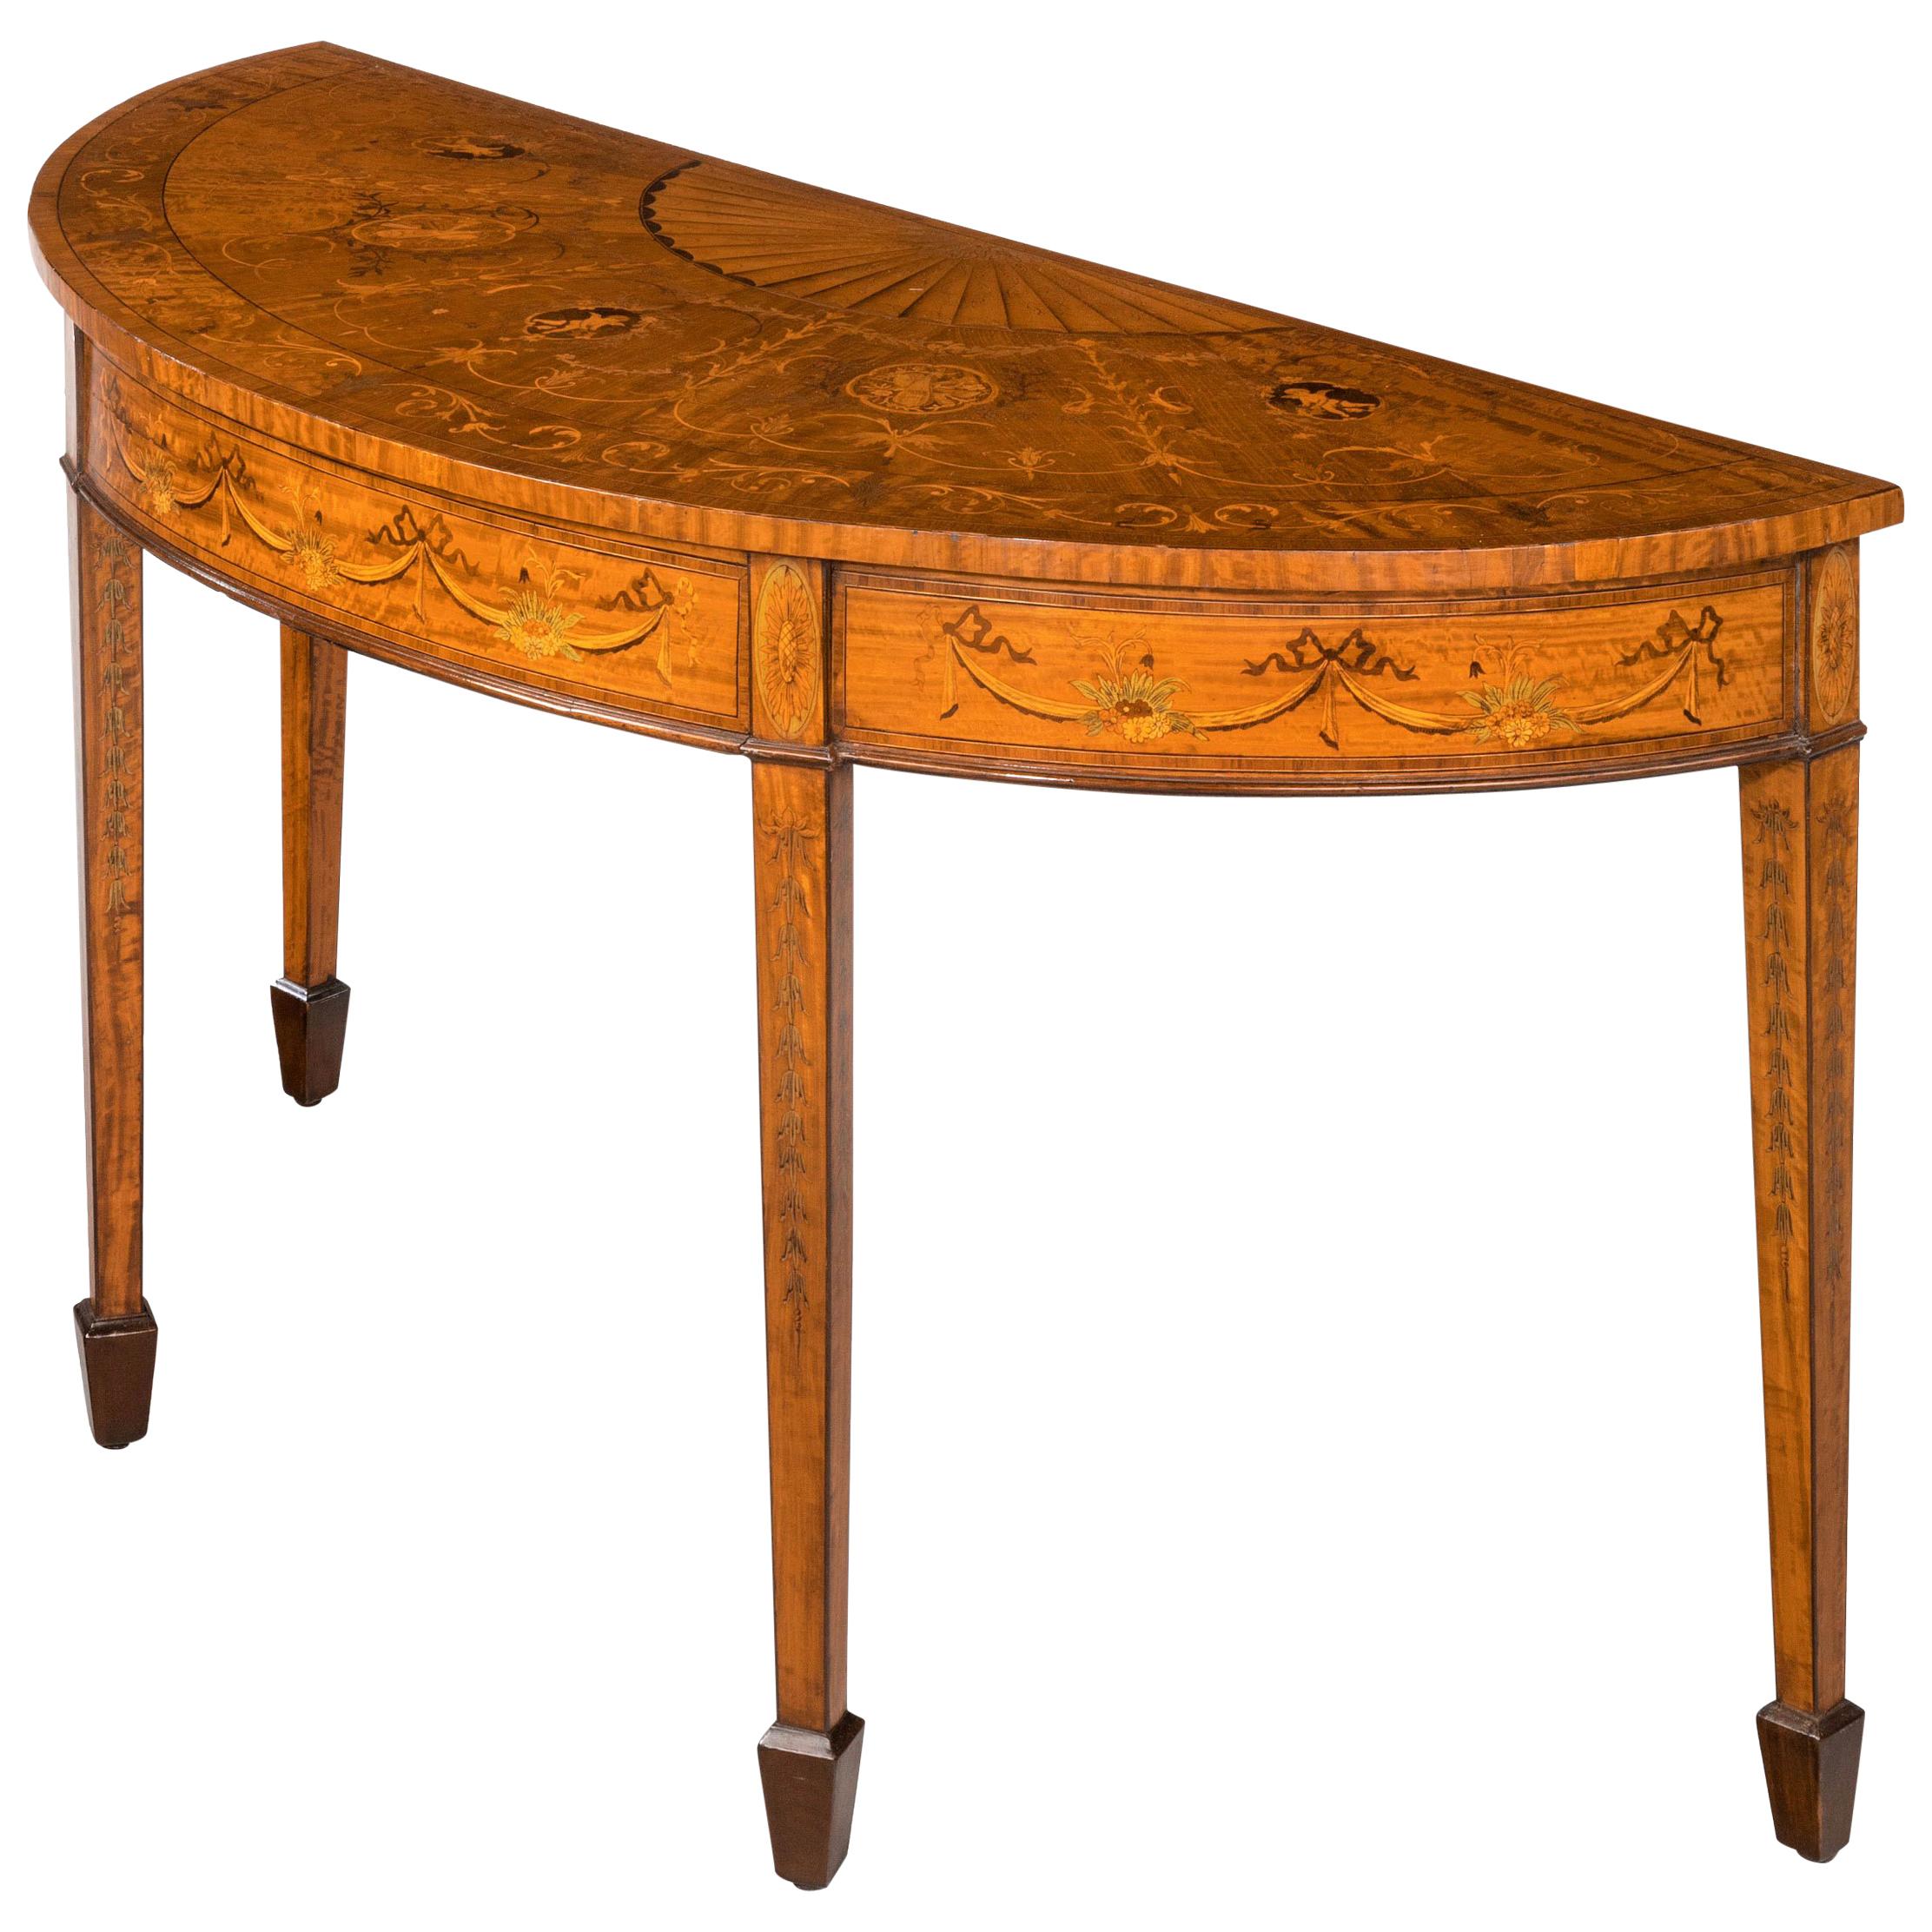 George III Period Mahogany Demilune Pier Table of Complex Form